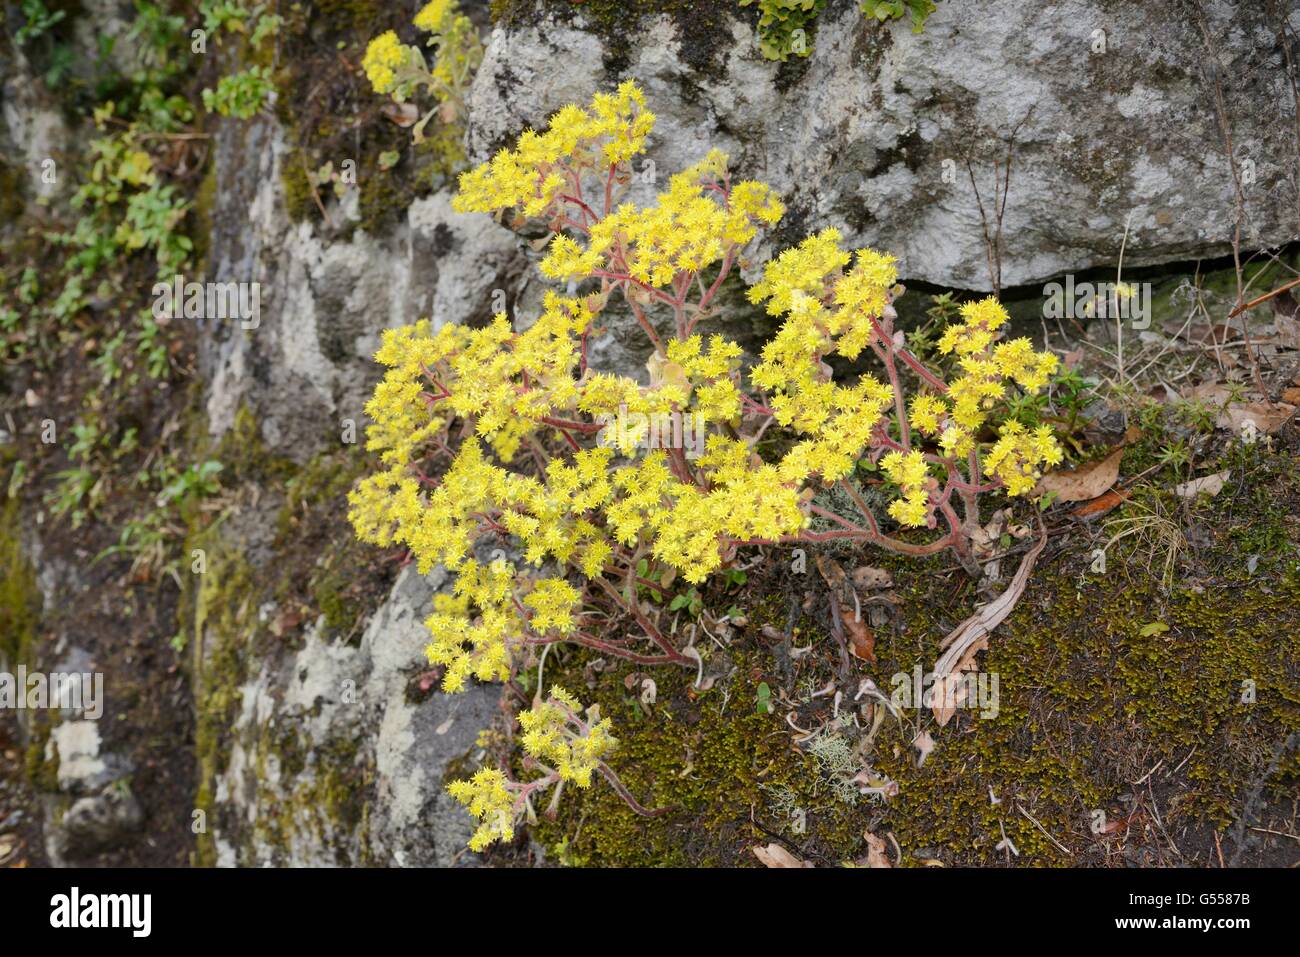 Tree of love / Mice ears (Aichryson laxum), a Canaries endemic, flowering on a rock face in montane laurel forest, Tenerife. Stock Photo